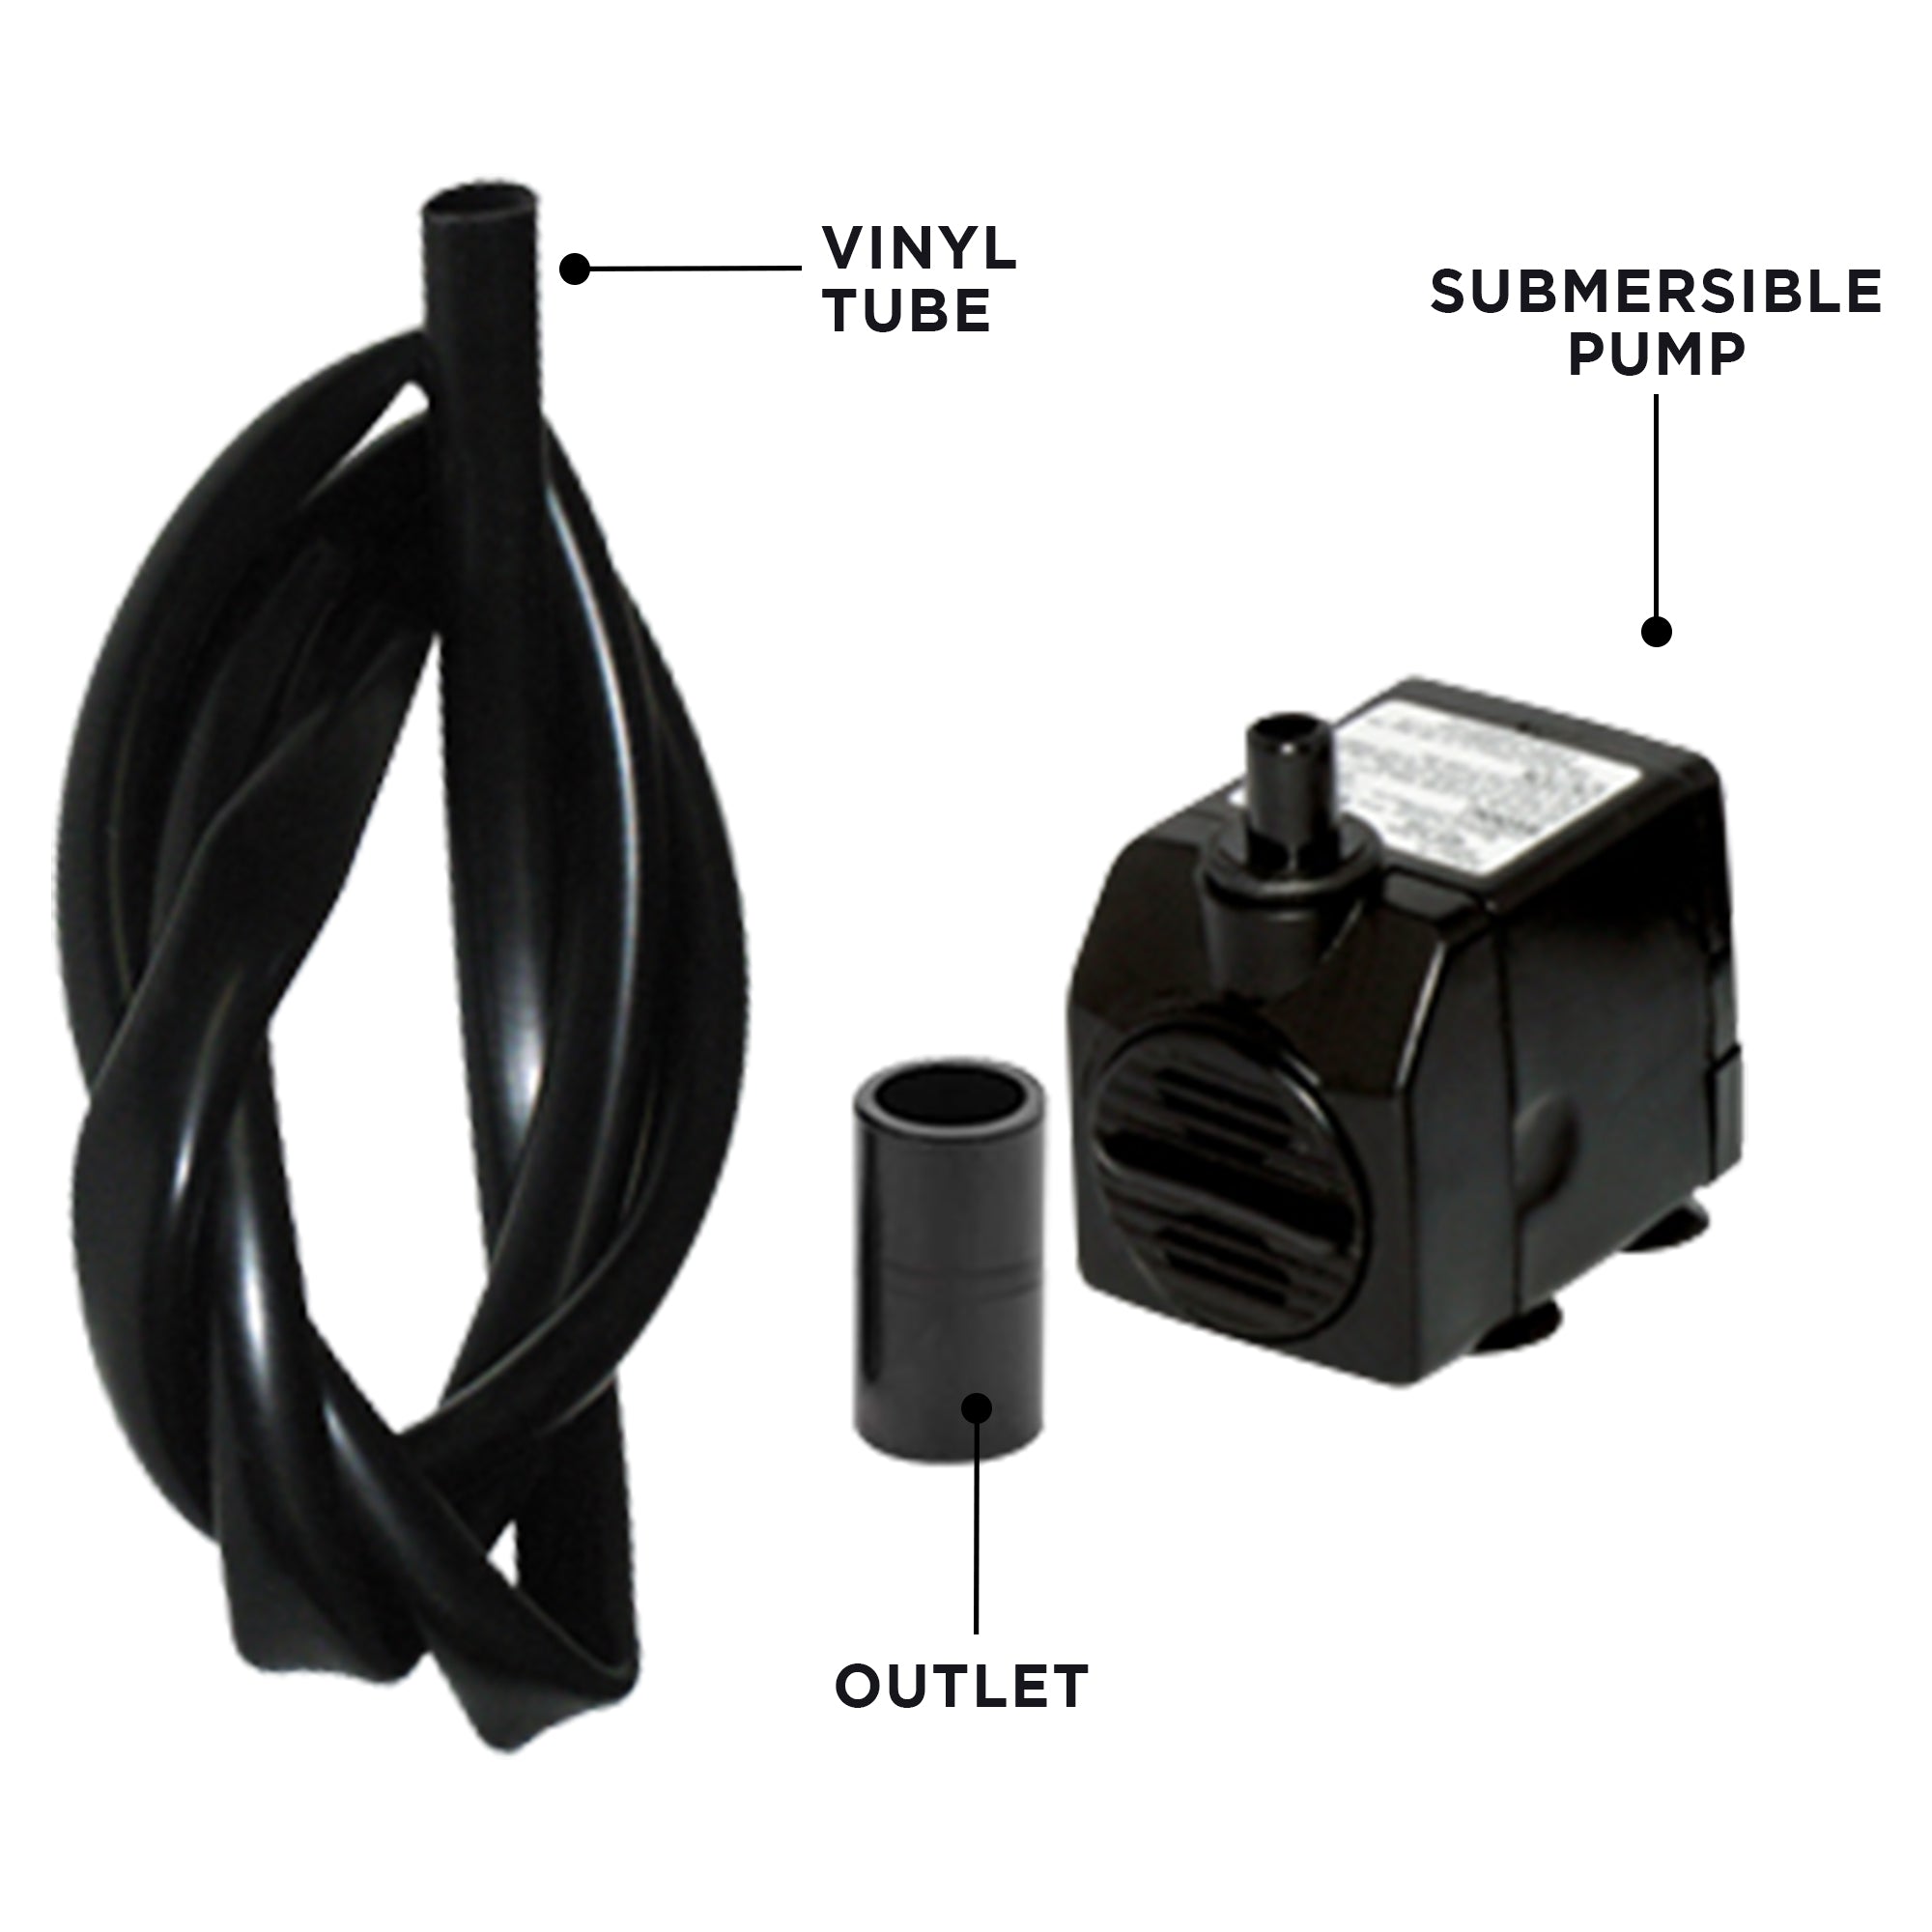 Product shots on a white background, labeled, of vinyl tube, submersible pump, and outlet adapter